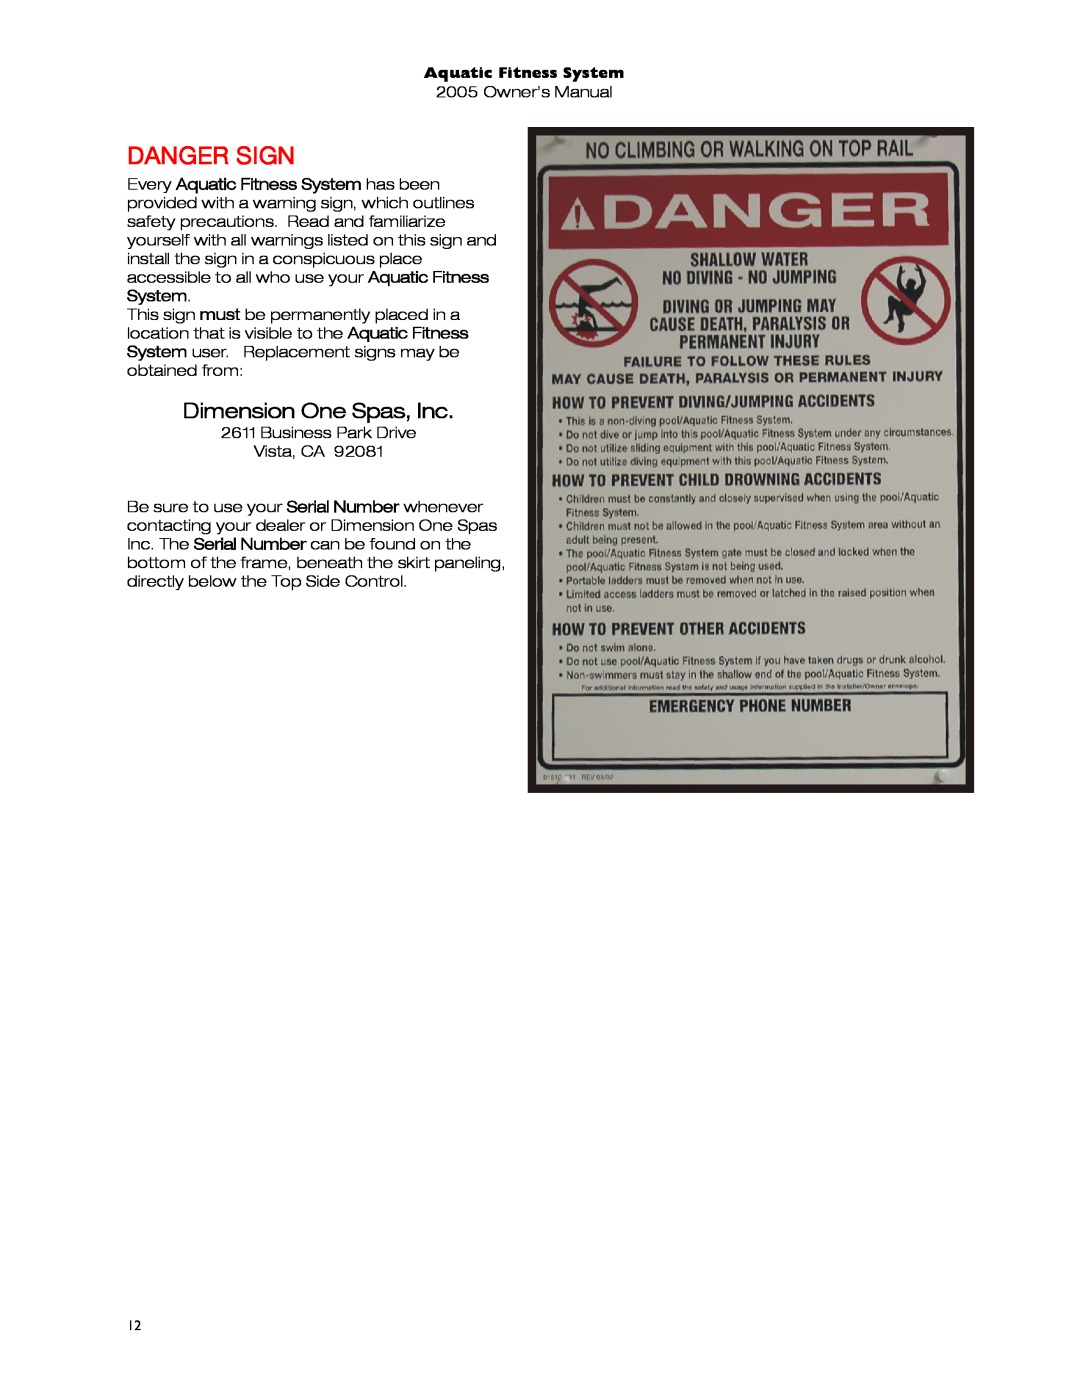 Dimension One Spas 01513-192 manual Danger Sign, Dimension One Spas, Inc, Aquatic Fitness System 